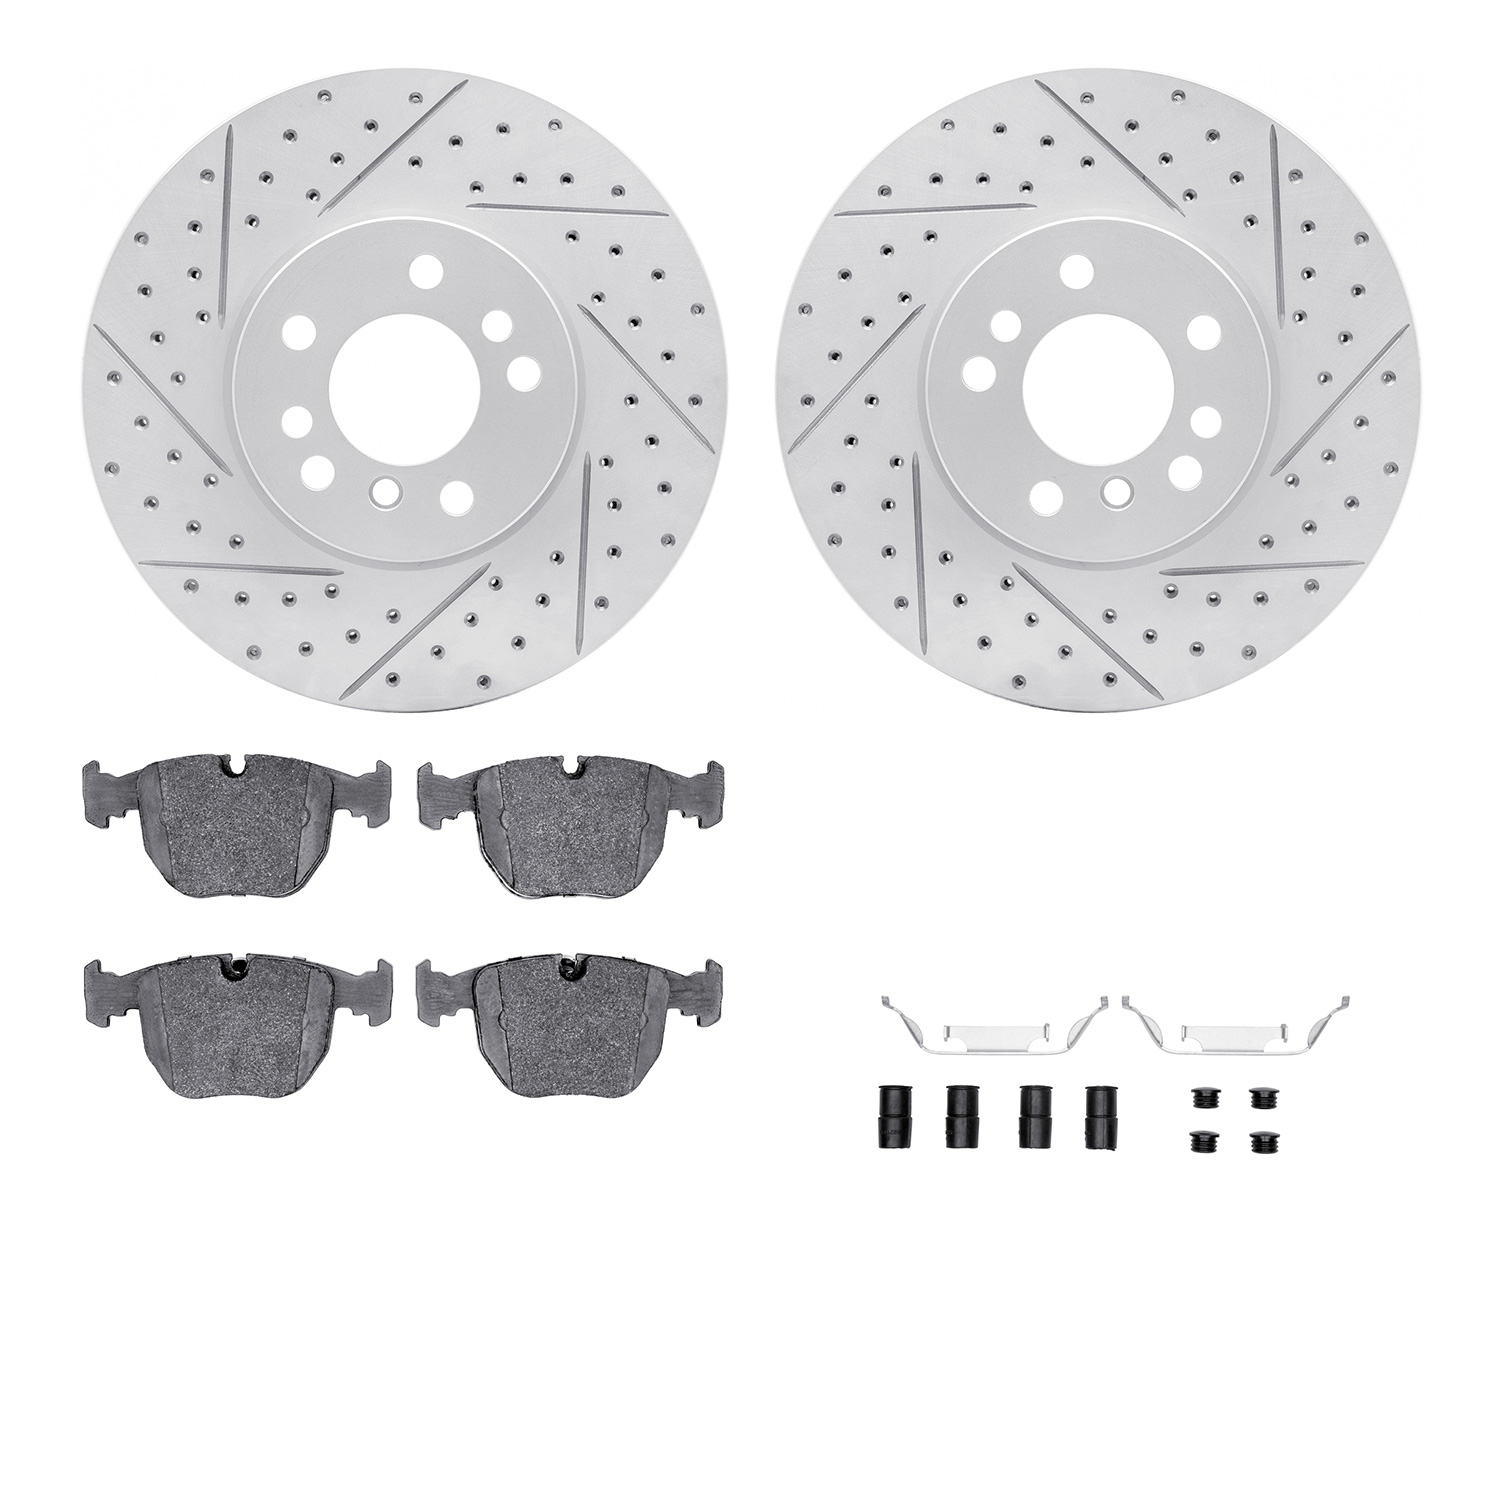 2512-31097 Geoperformance Drilled/Slotted Rotors w/5000 Advanced Brake Pads Kit & Hardware, 2000-2006 BMW, Position: Front